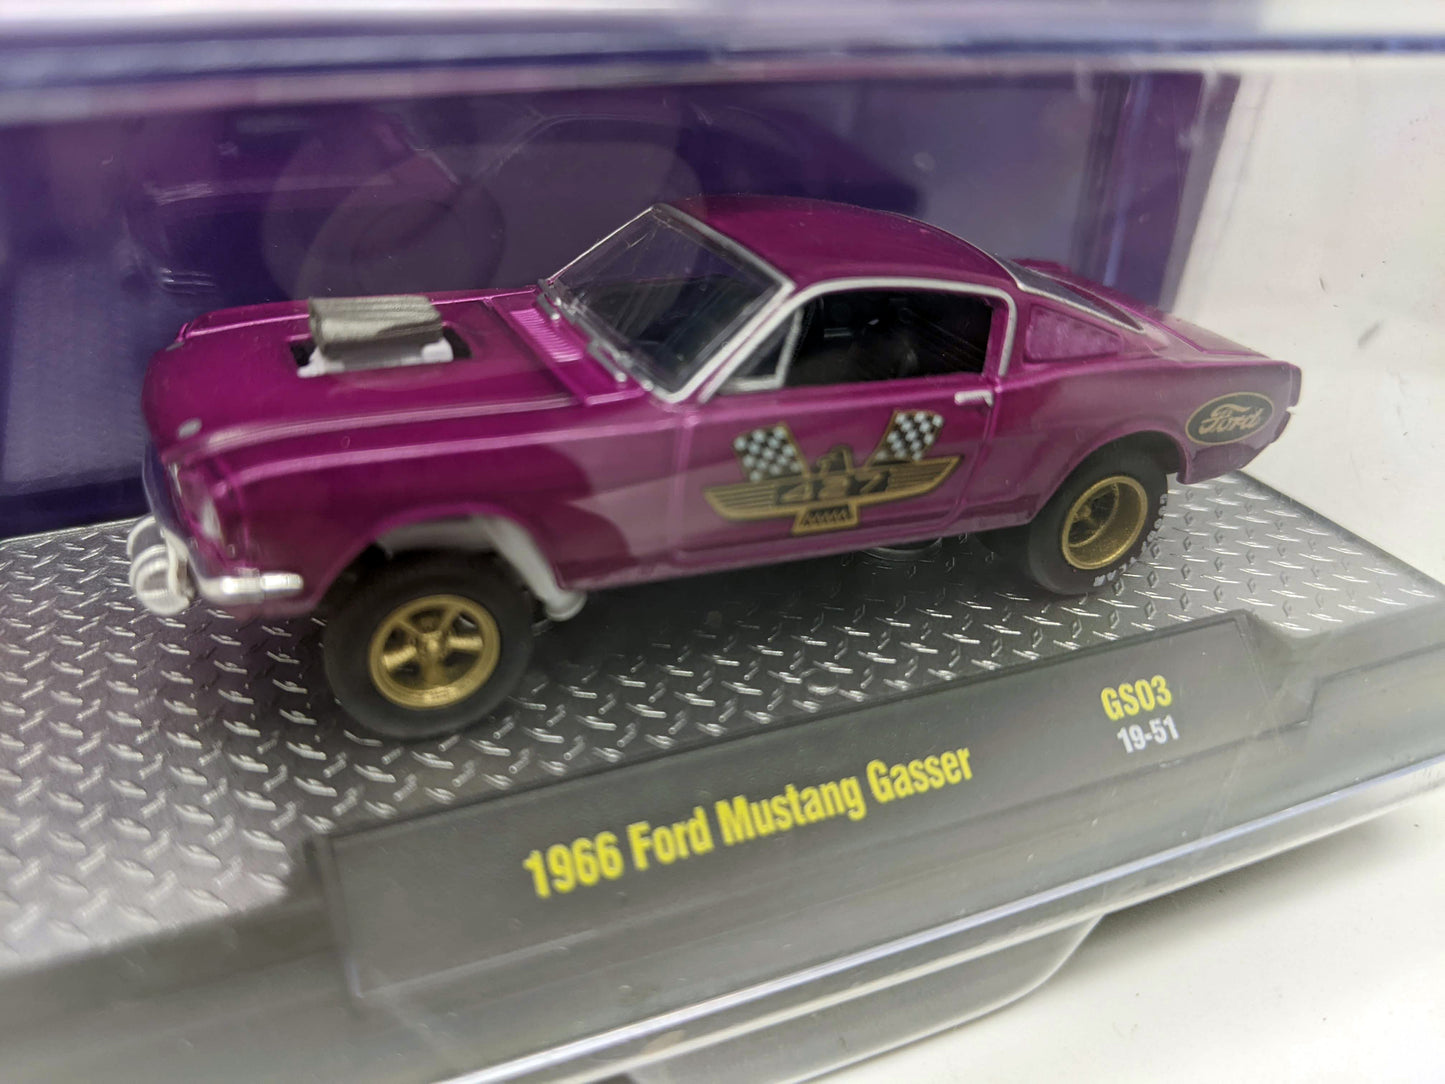 M2 1966 Ford Mustang Gasser